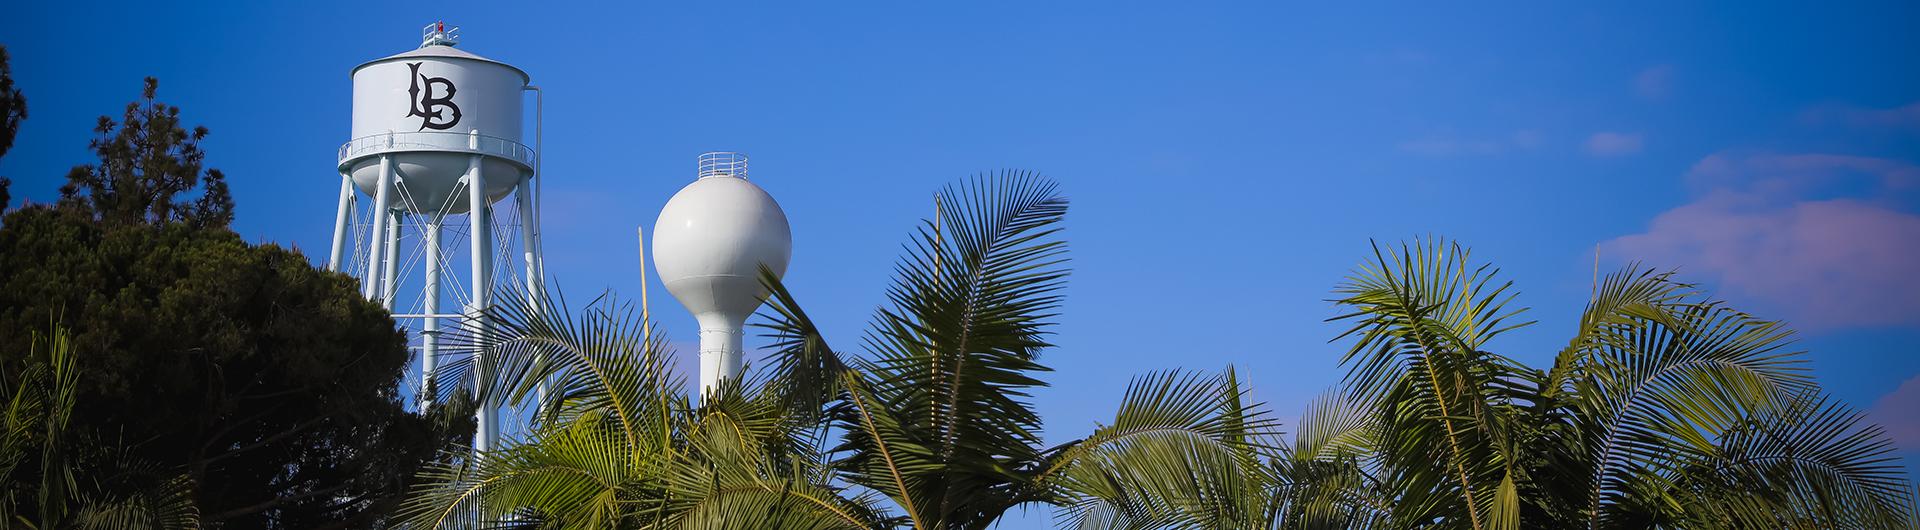 Banner PHOTO of campus includes LB Water tower and trees